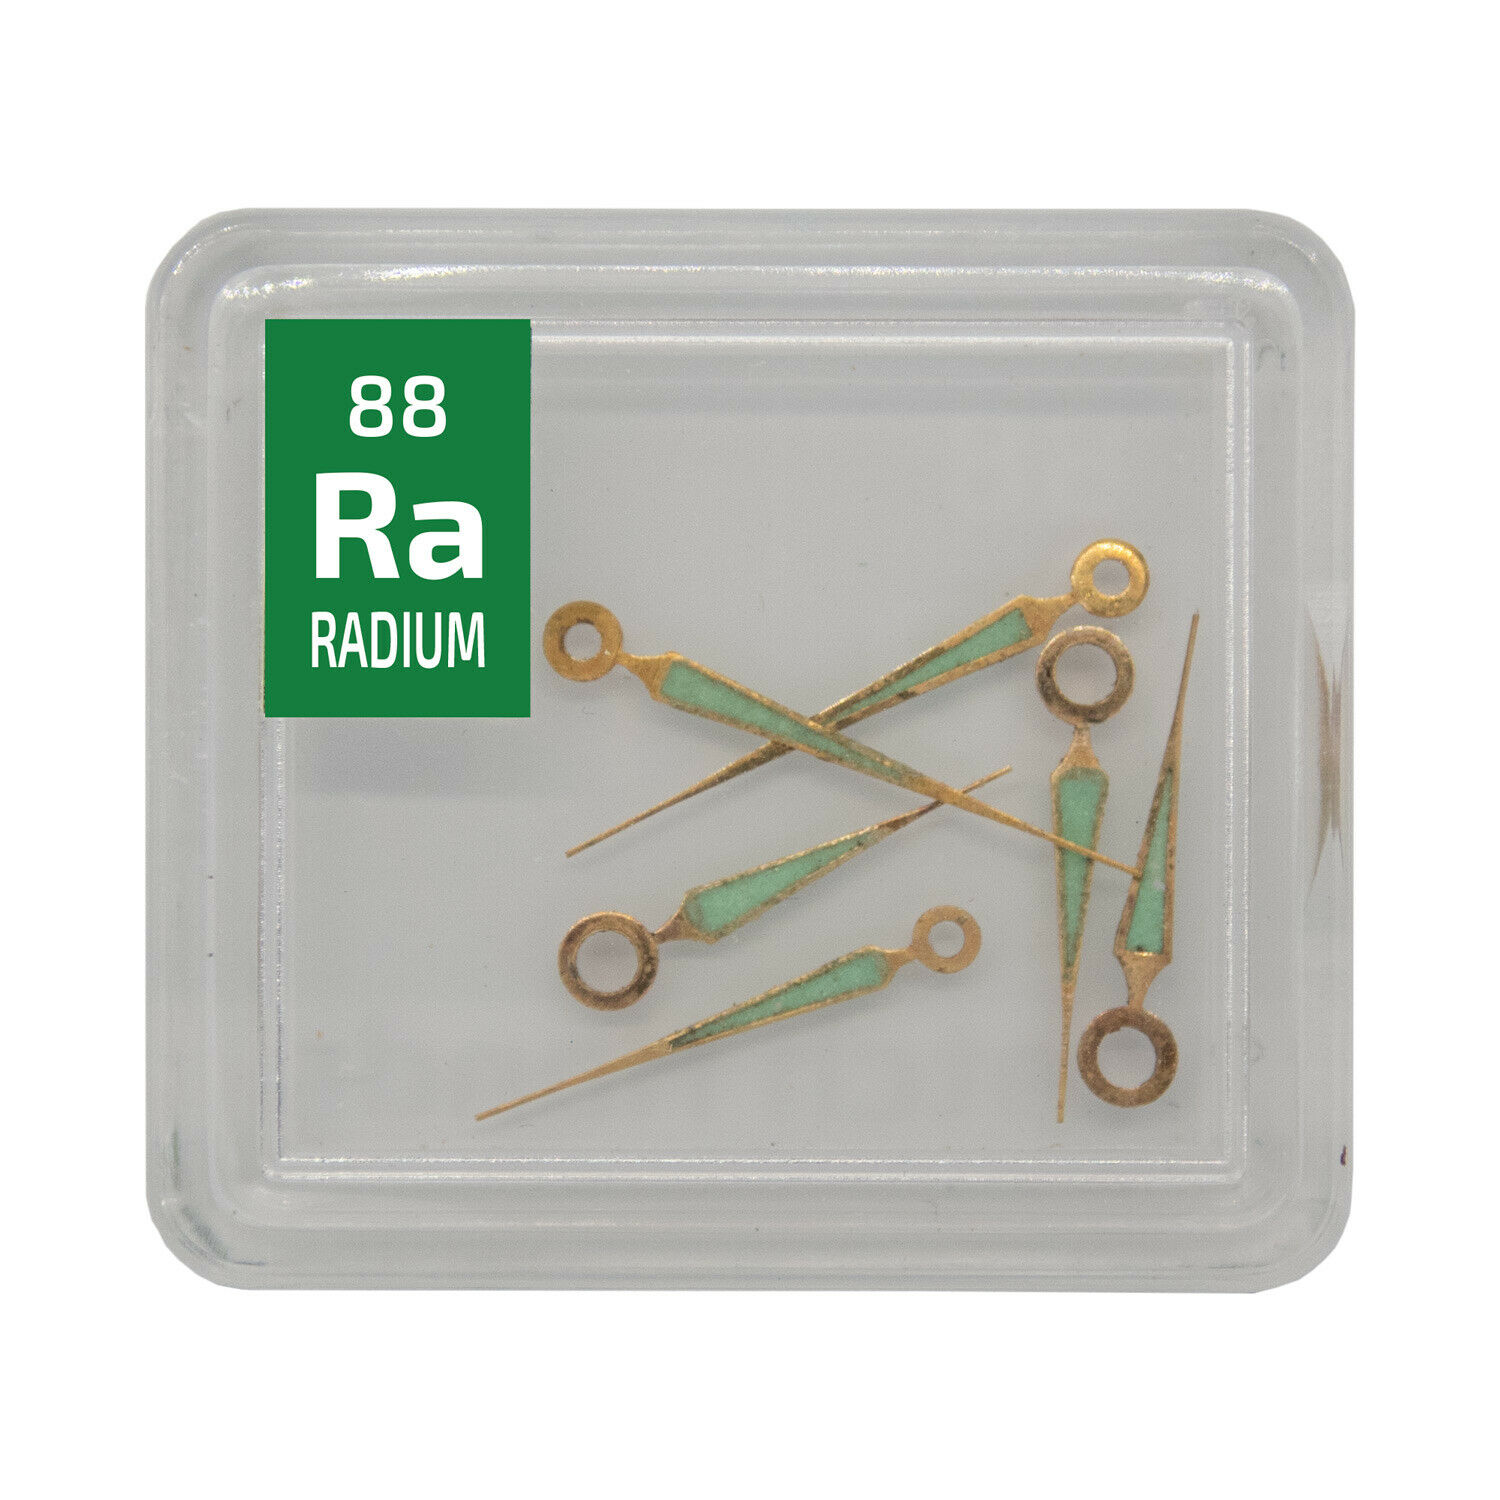 6 X Radium Watch Hands Check Source Ra Element Sample In Periodic Element Tile